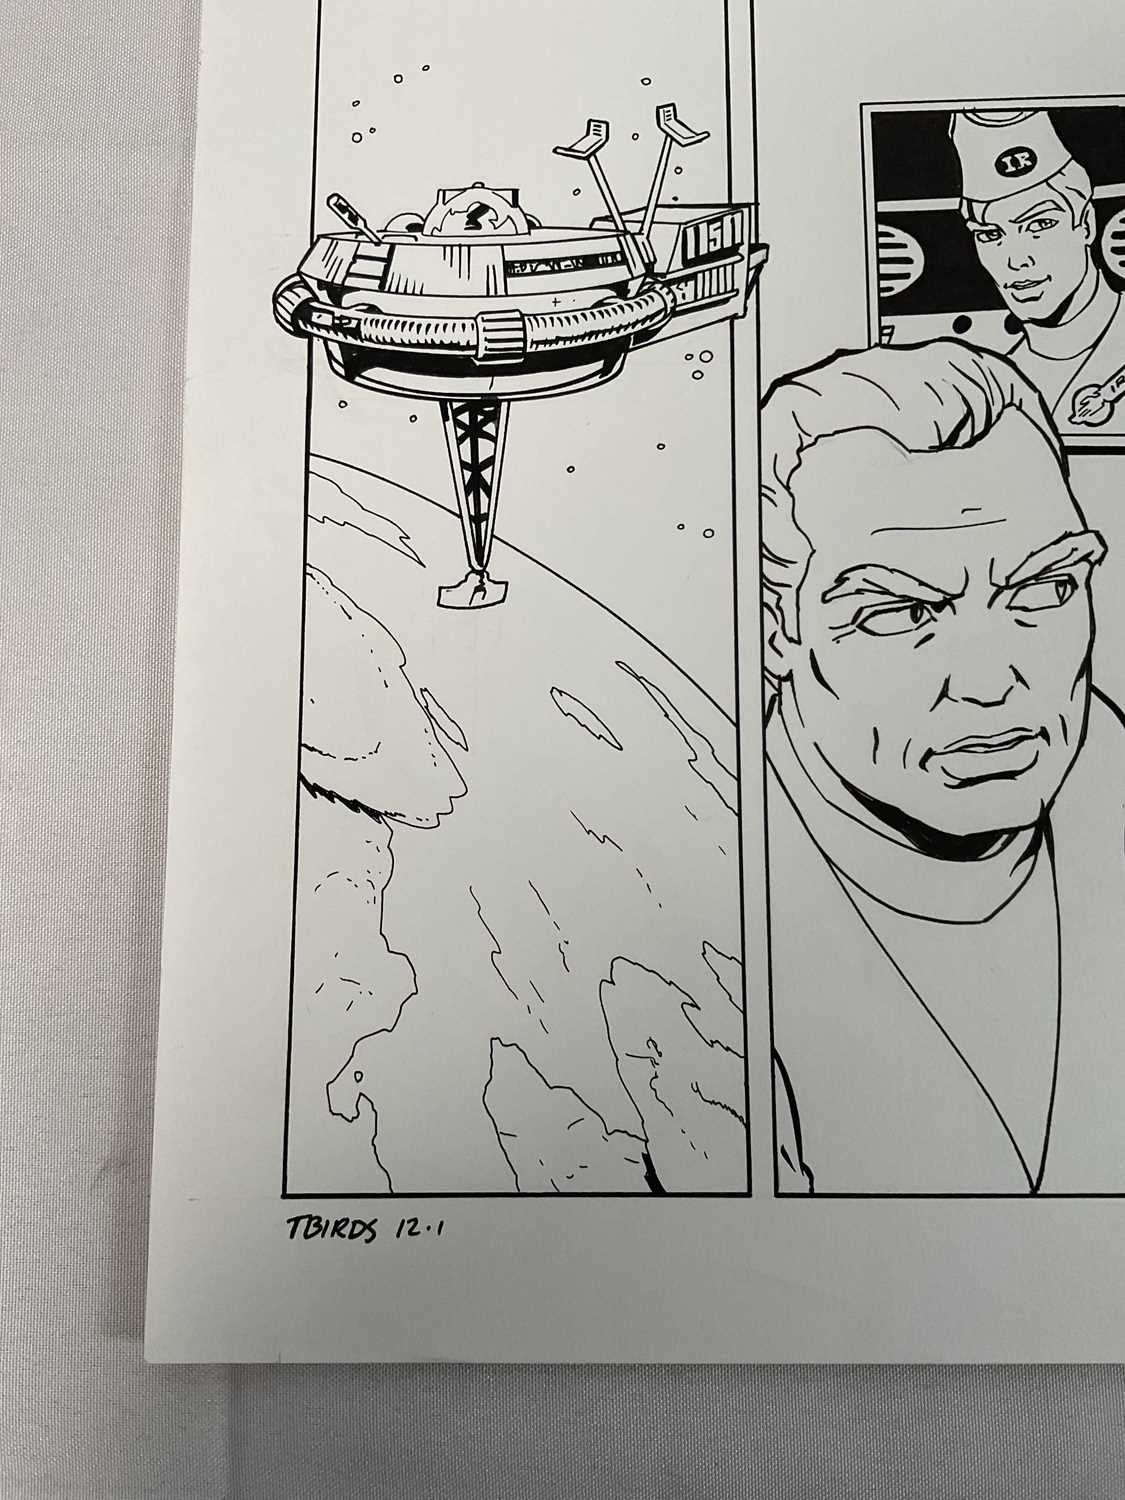 Original Comic Book artwork - Lee Sullivan artwork for an issue of Gerry Anderson's THUNDERBIRDS, c. - Image 3 of 3